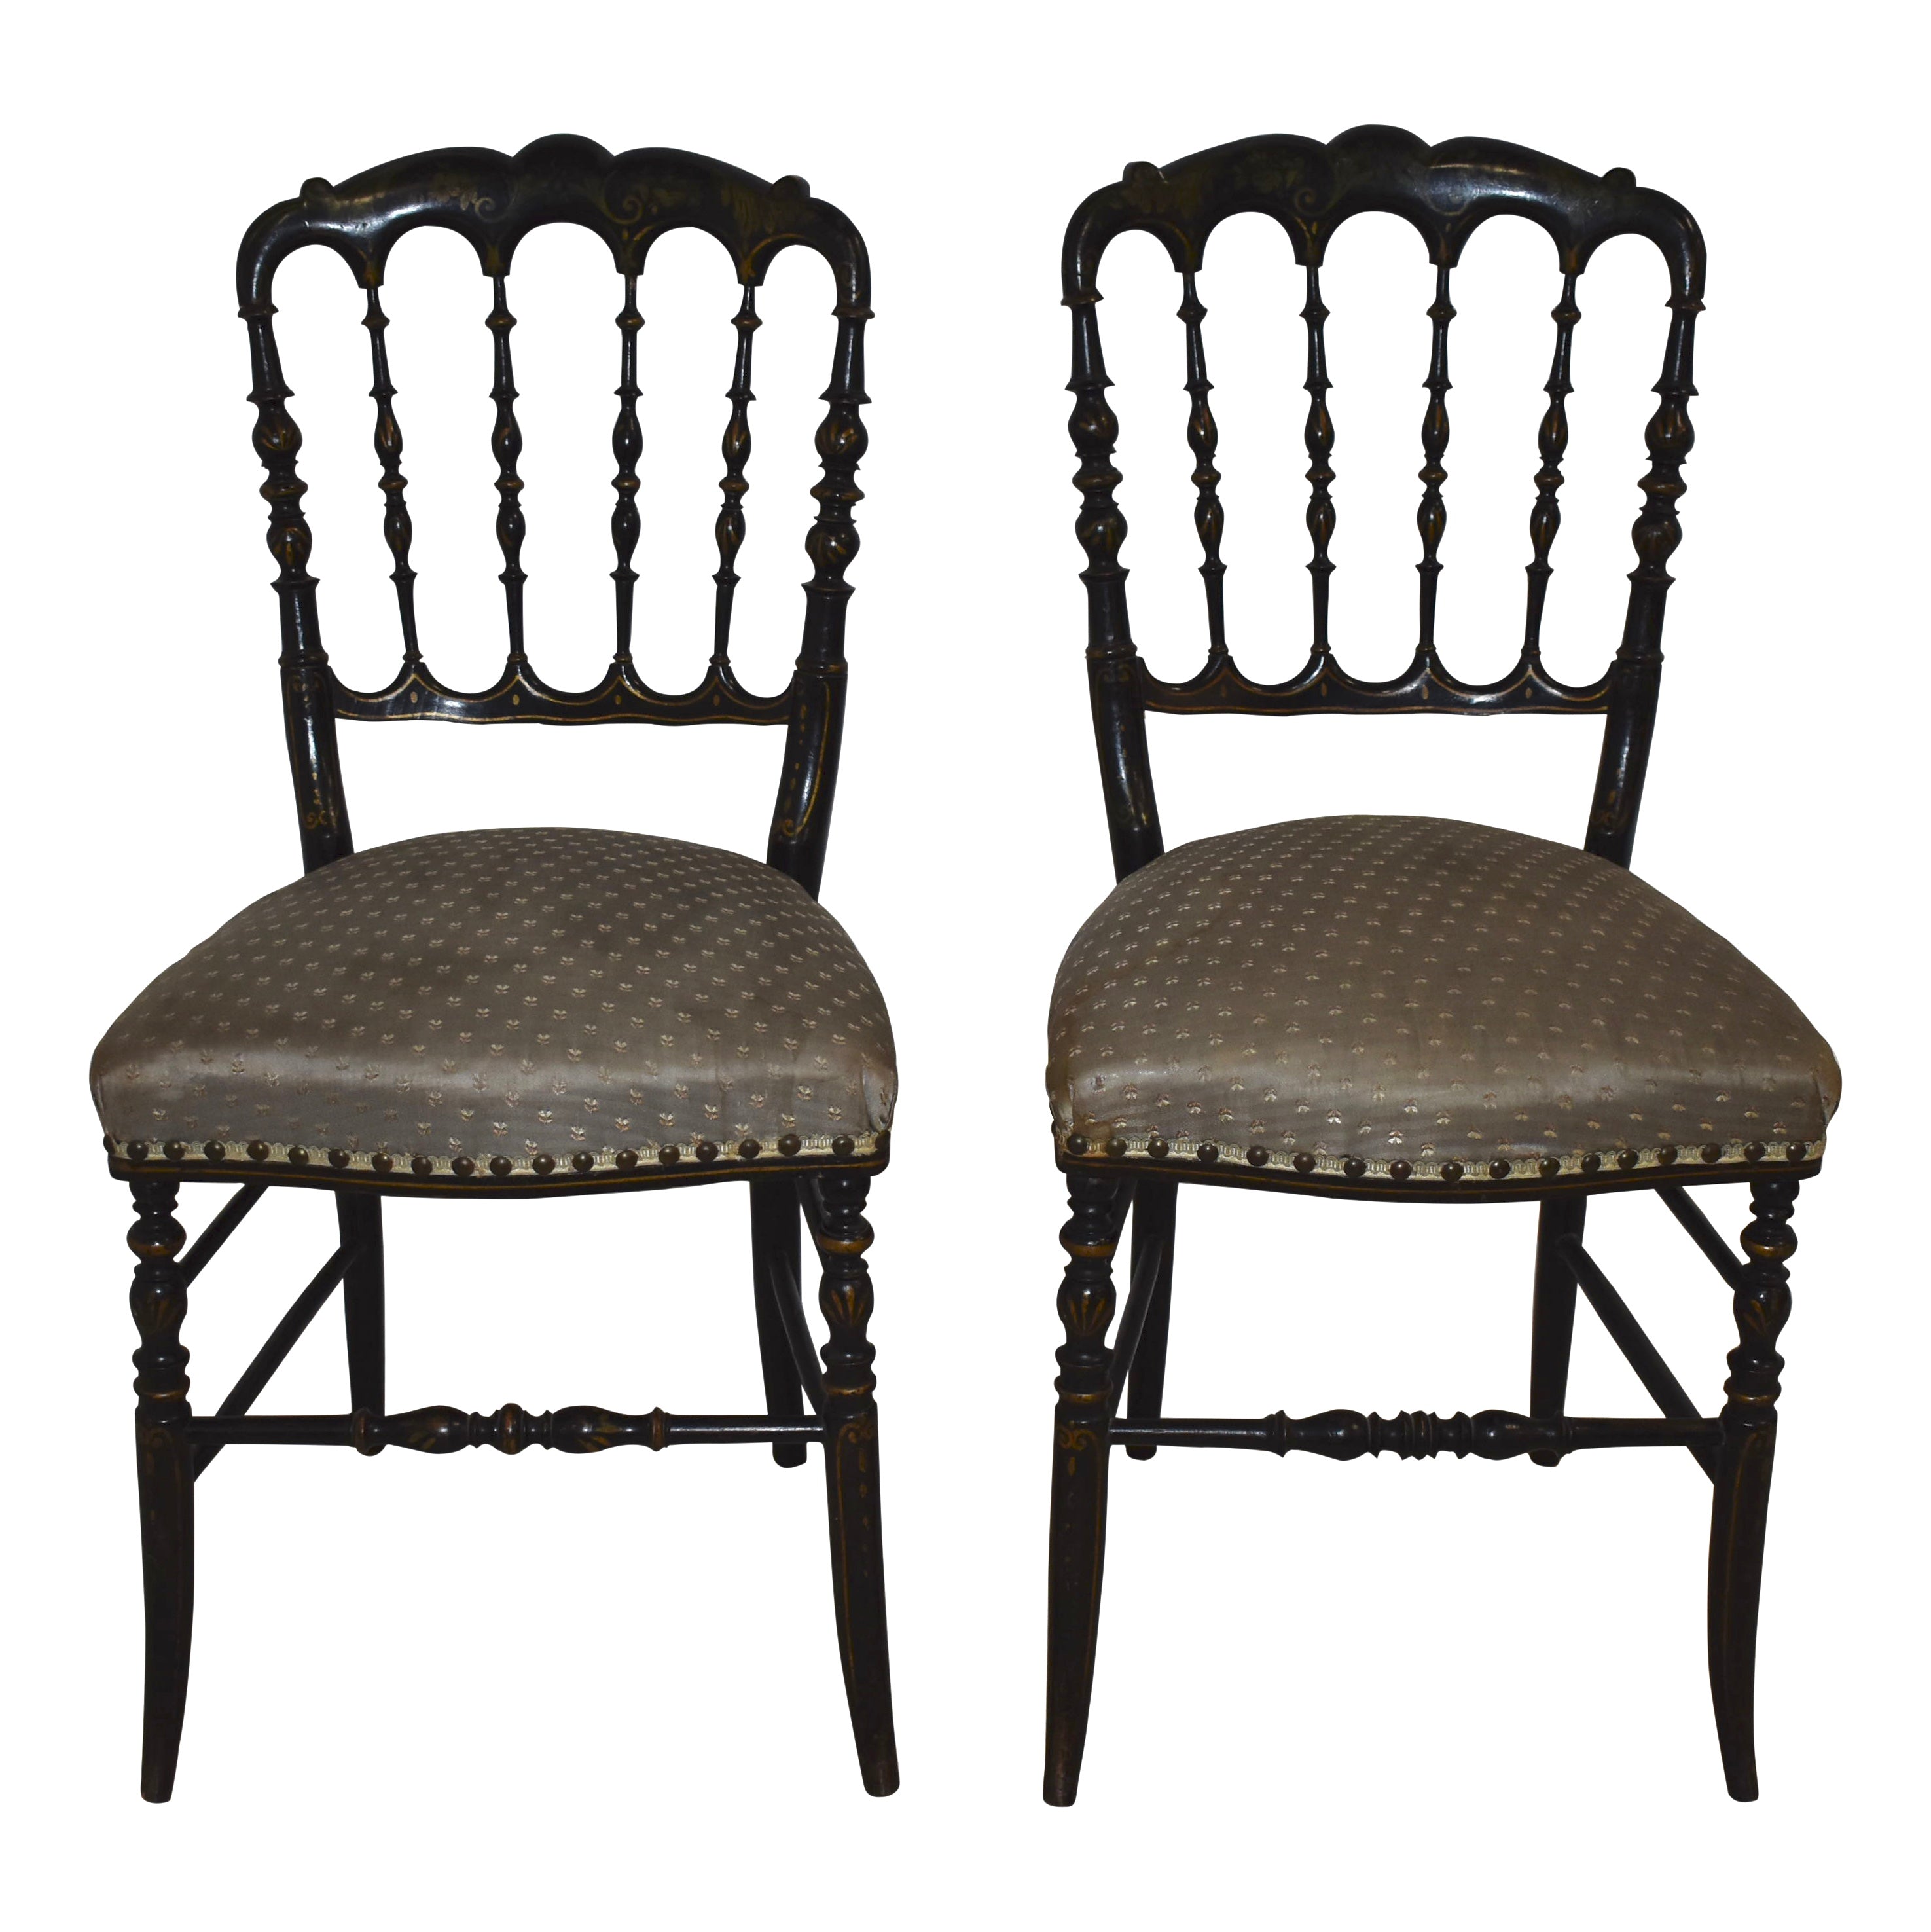 Hand Painted Chairs with Upholsered Seats, Set of Two